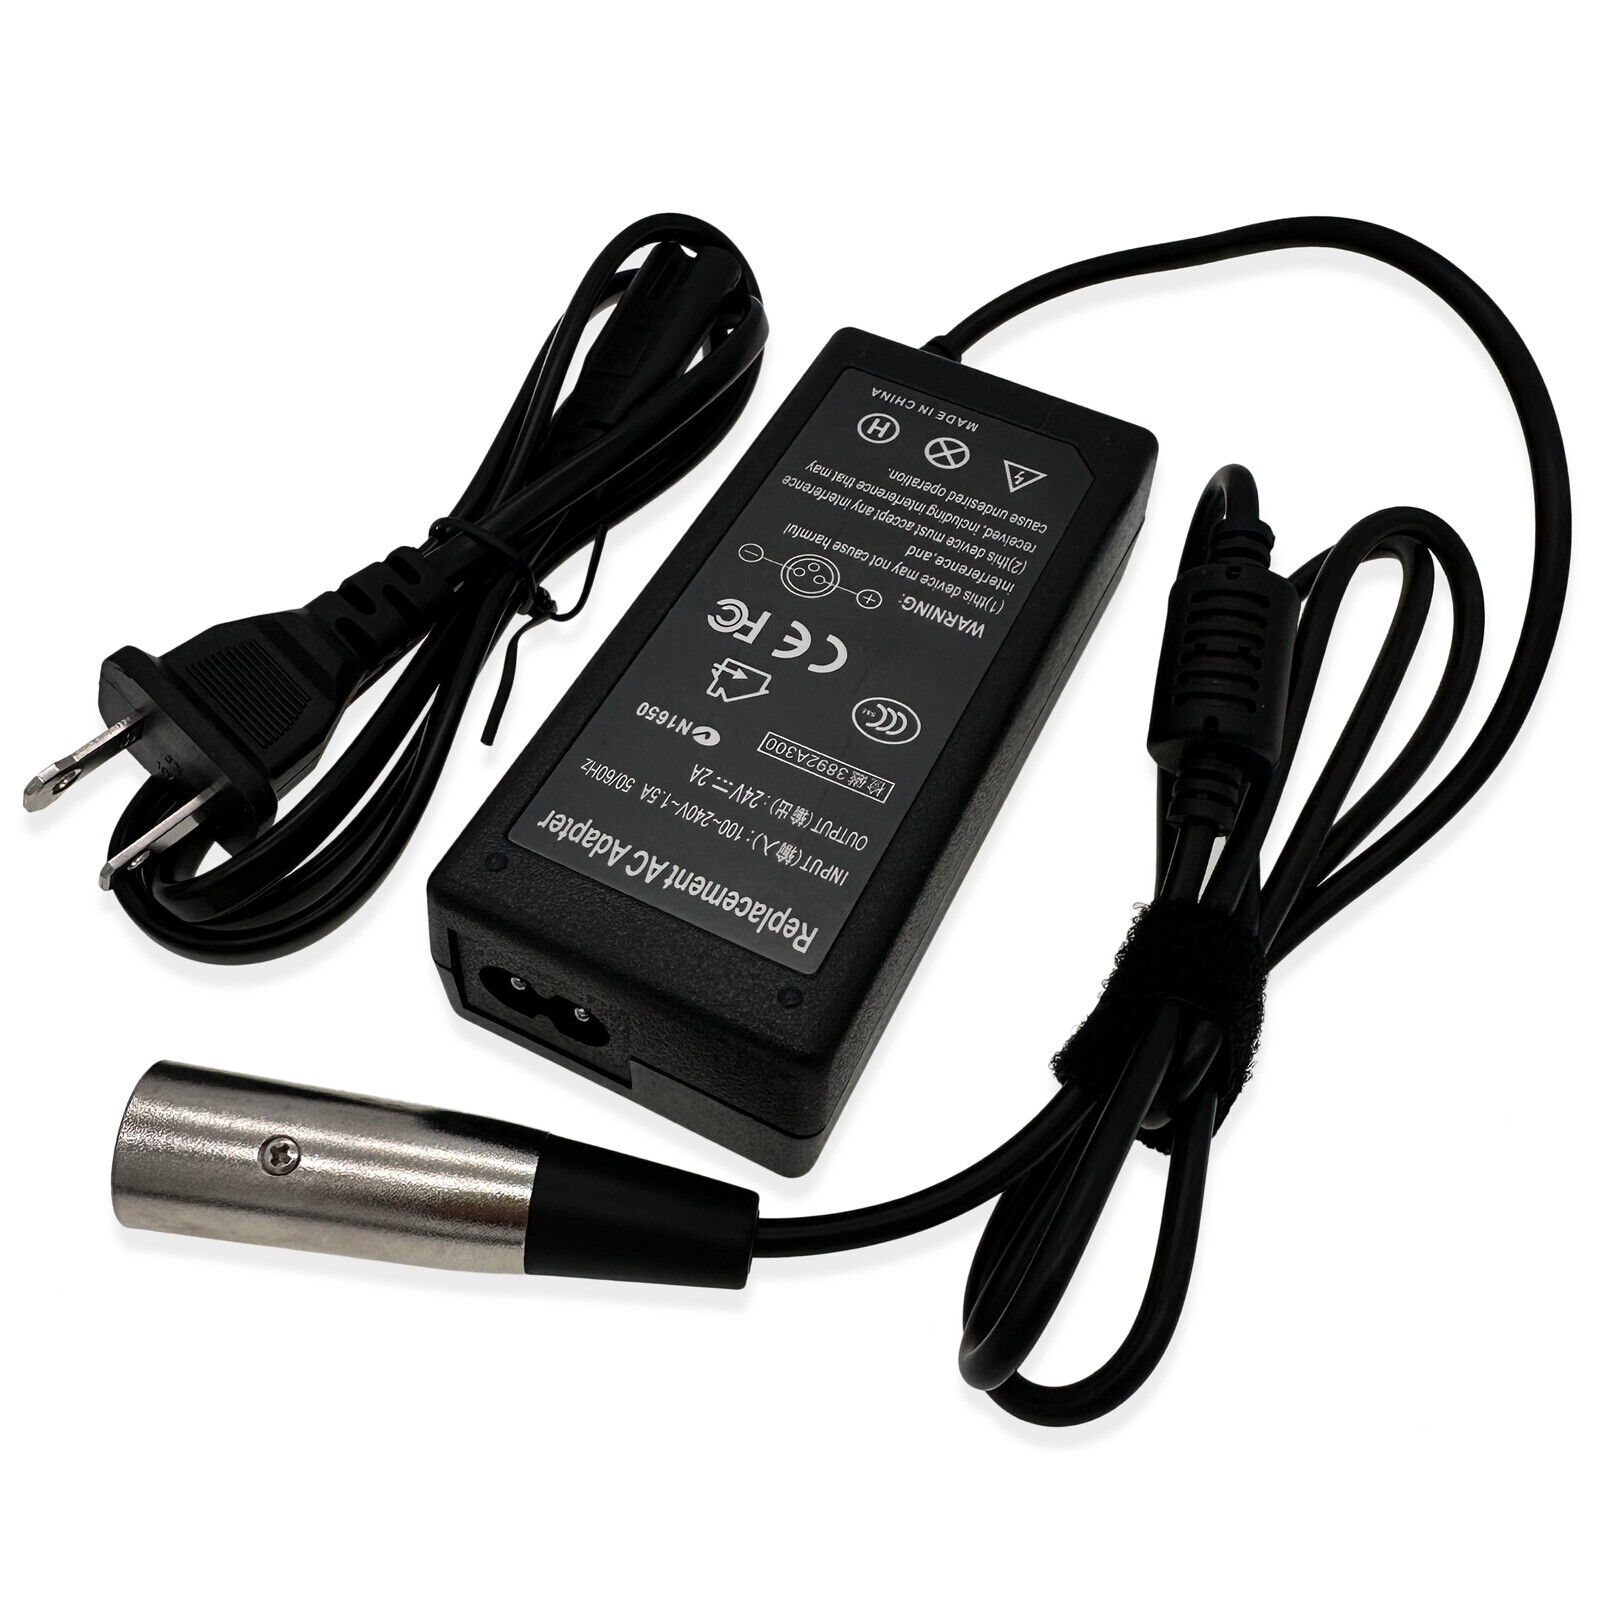 24V 2A Battery Charger for LASHOUT 400W 600W Shoprider mobility Scootie Scooter 24V 2A Battery Charger for LASHOUT 400W - Click Image to Close